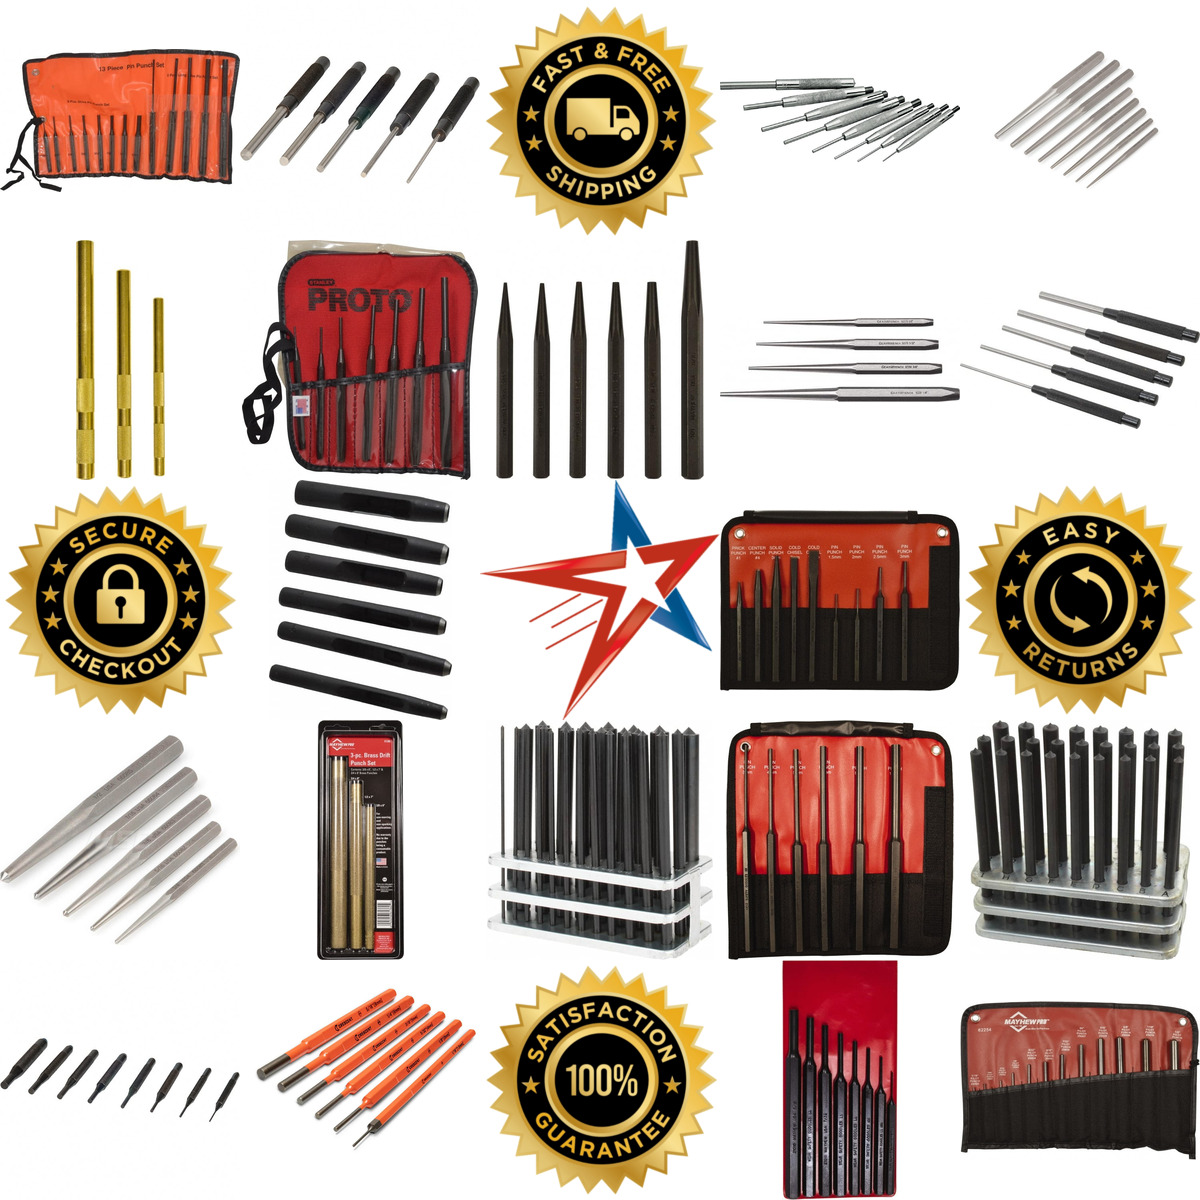 A selection of Punch Sets products on GoVets